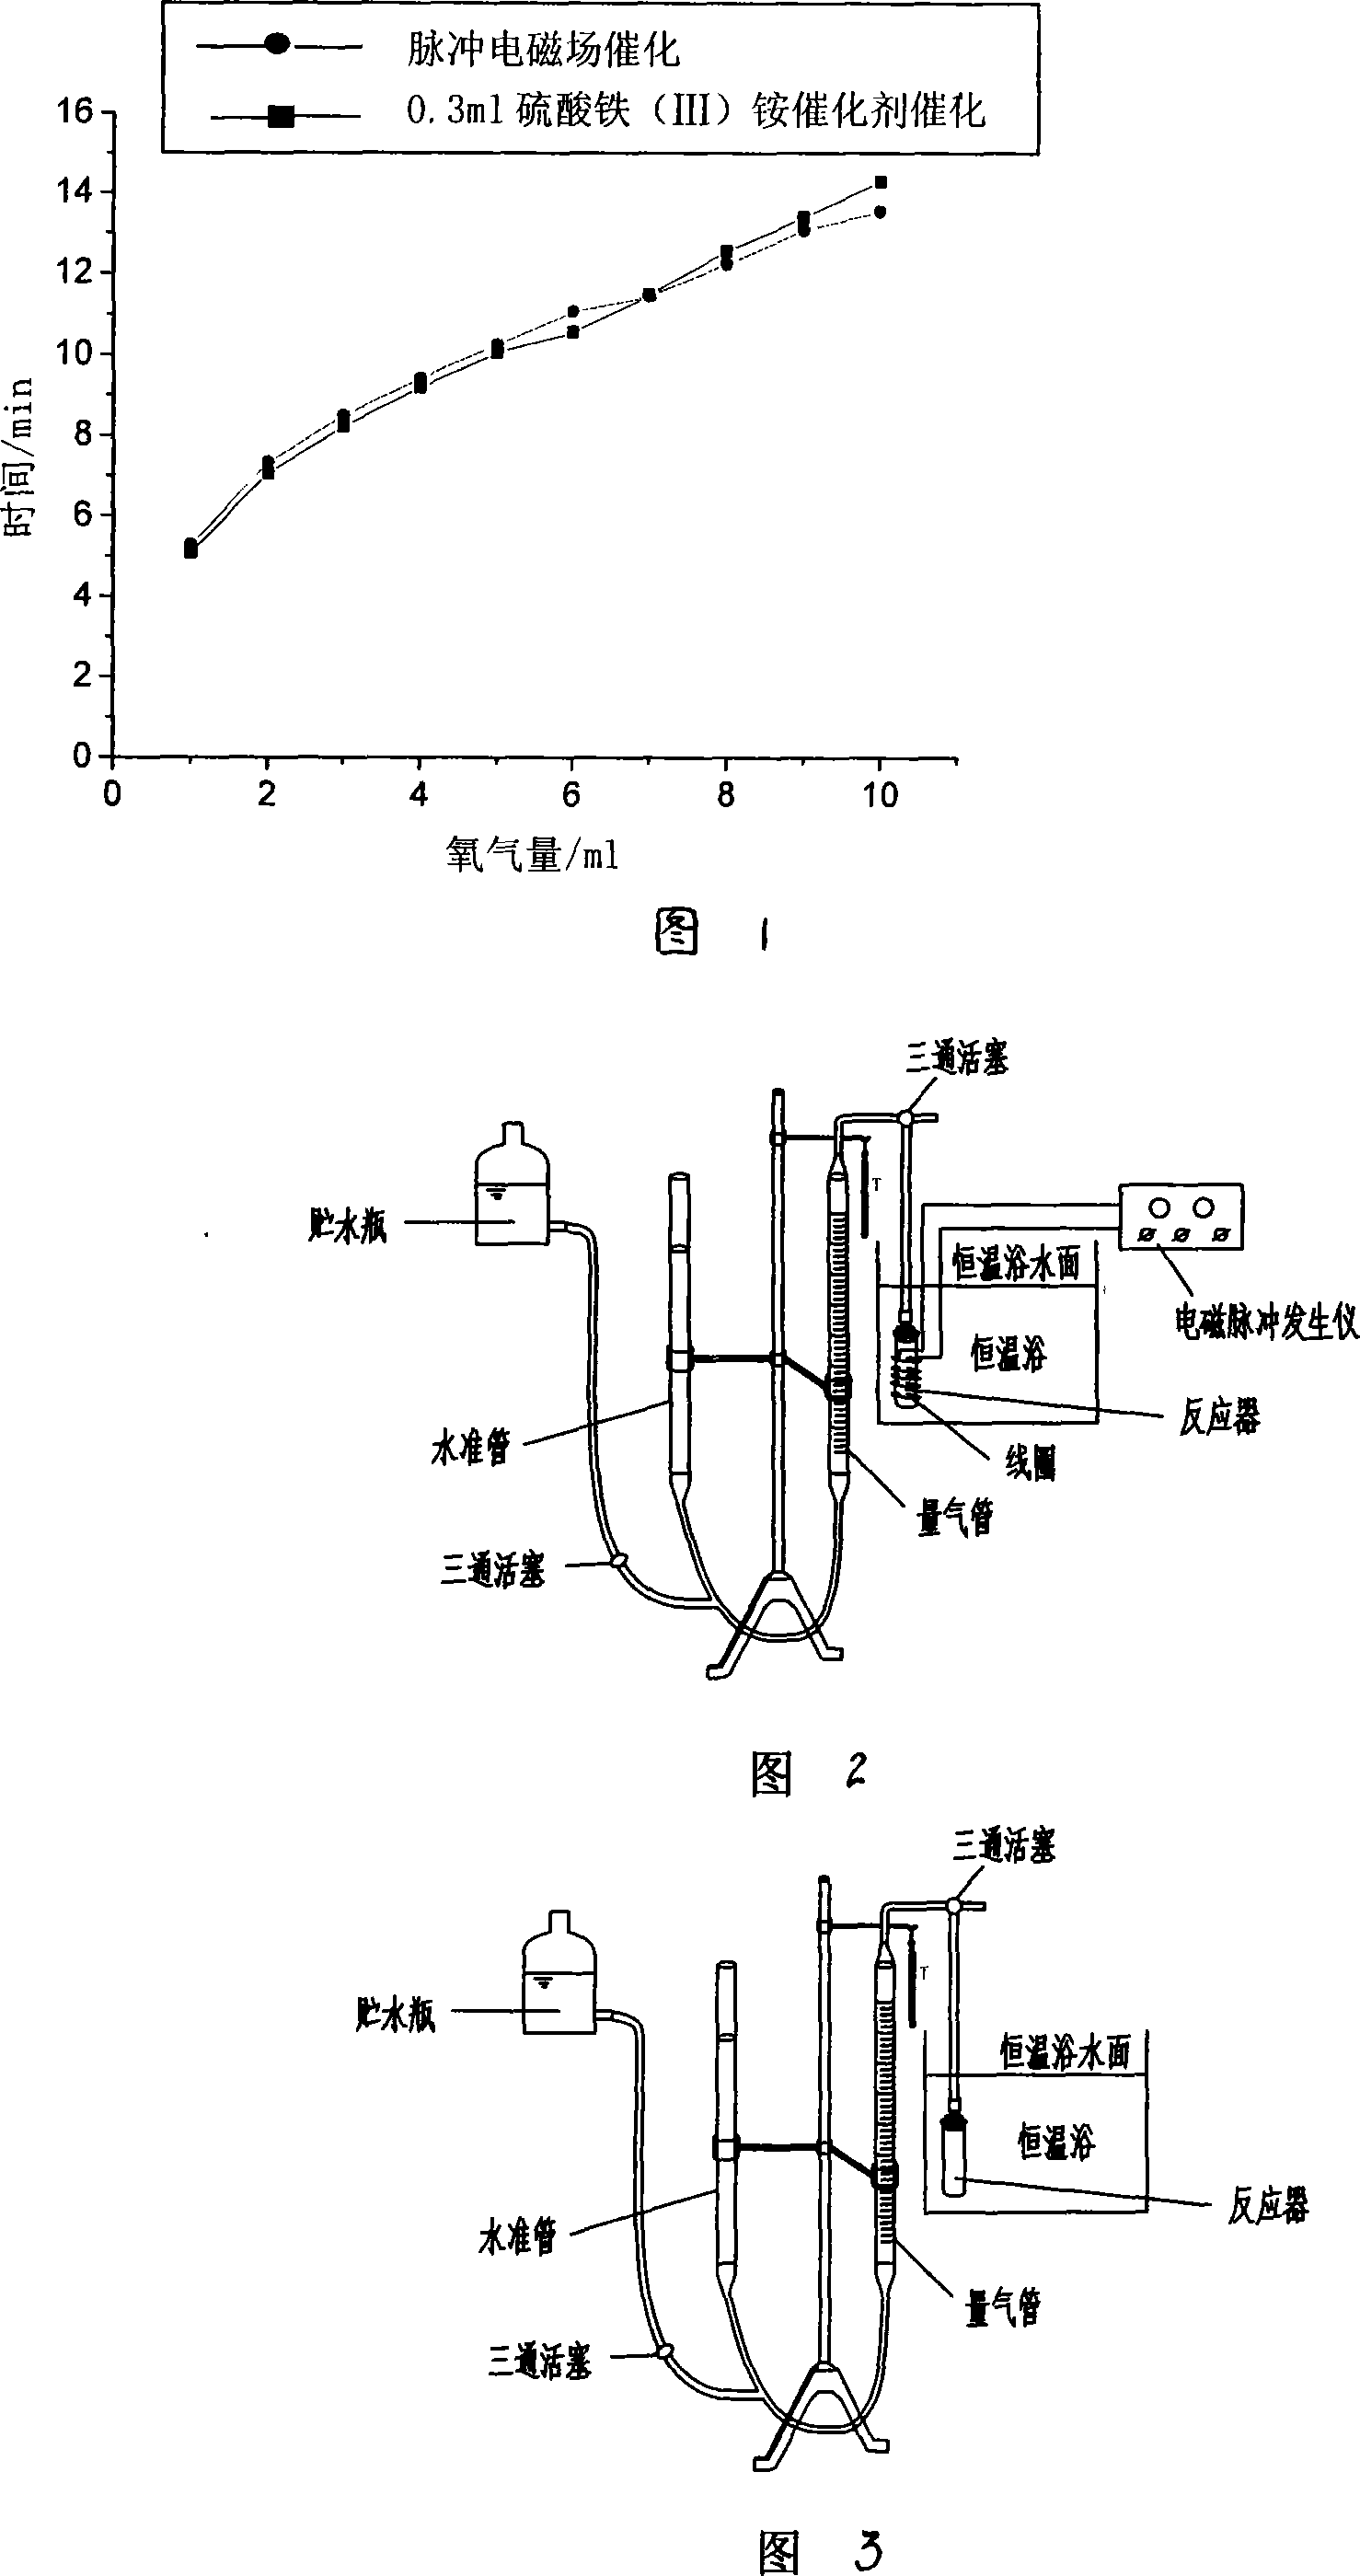 Method for catalyzing chemical reaction through pulse electromagnetic field